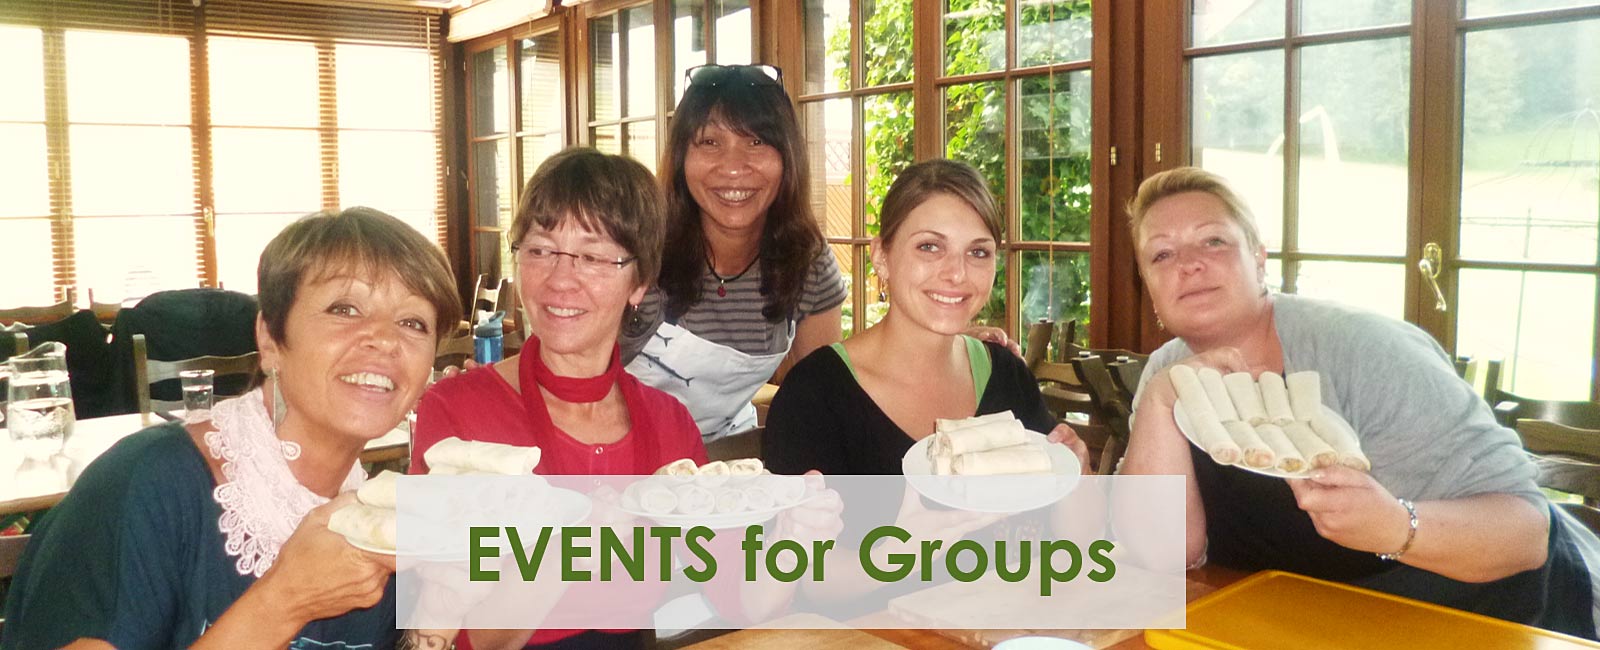 Treetalks Events for groups